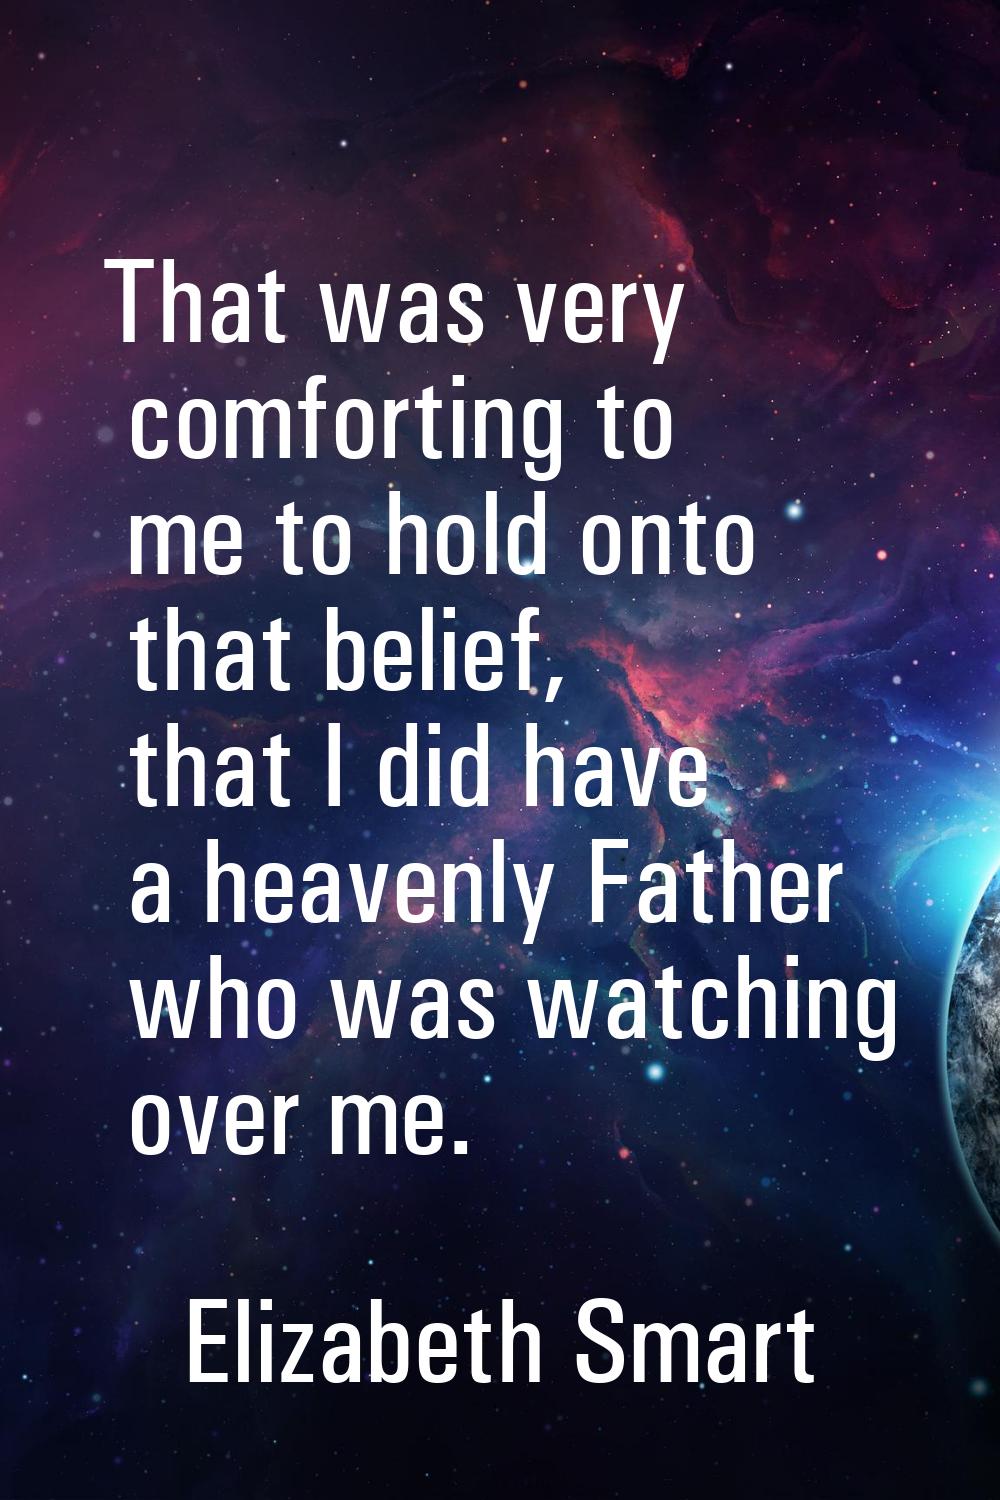 That was very comforting to me to hold onto that belief, that I did have a heavenly Father who was 